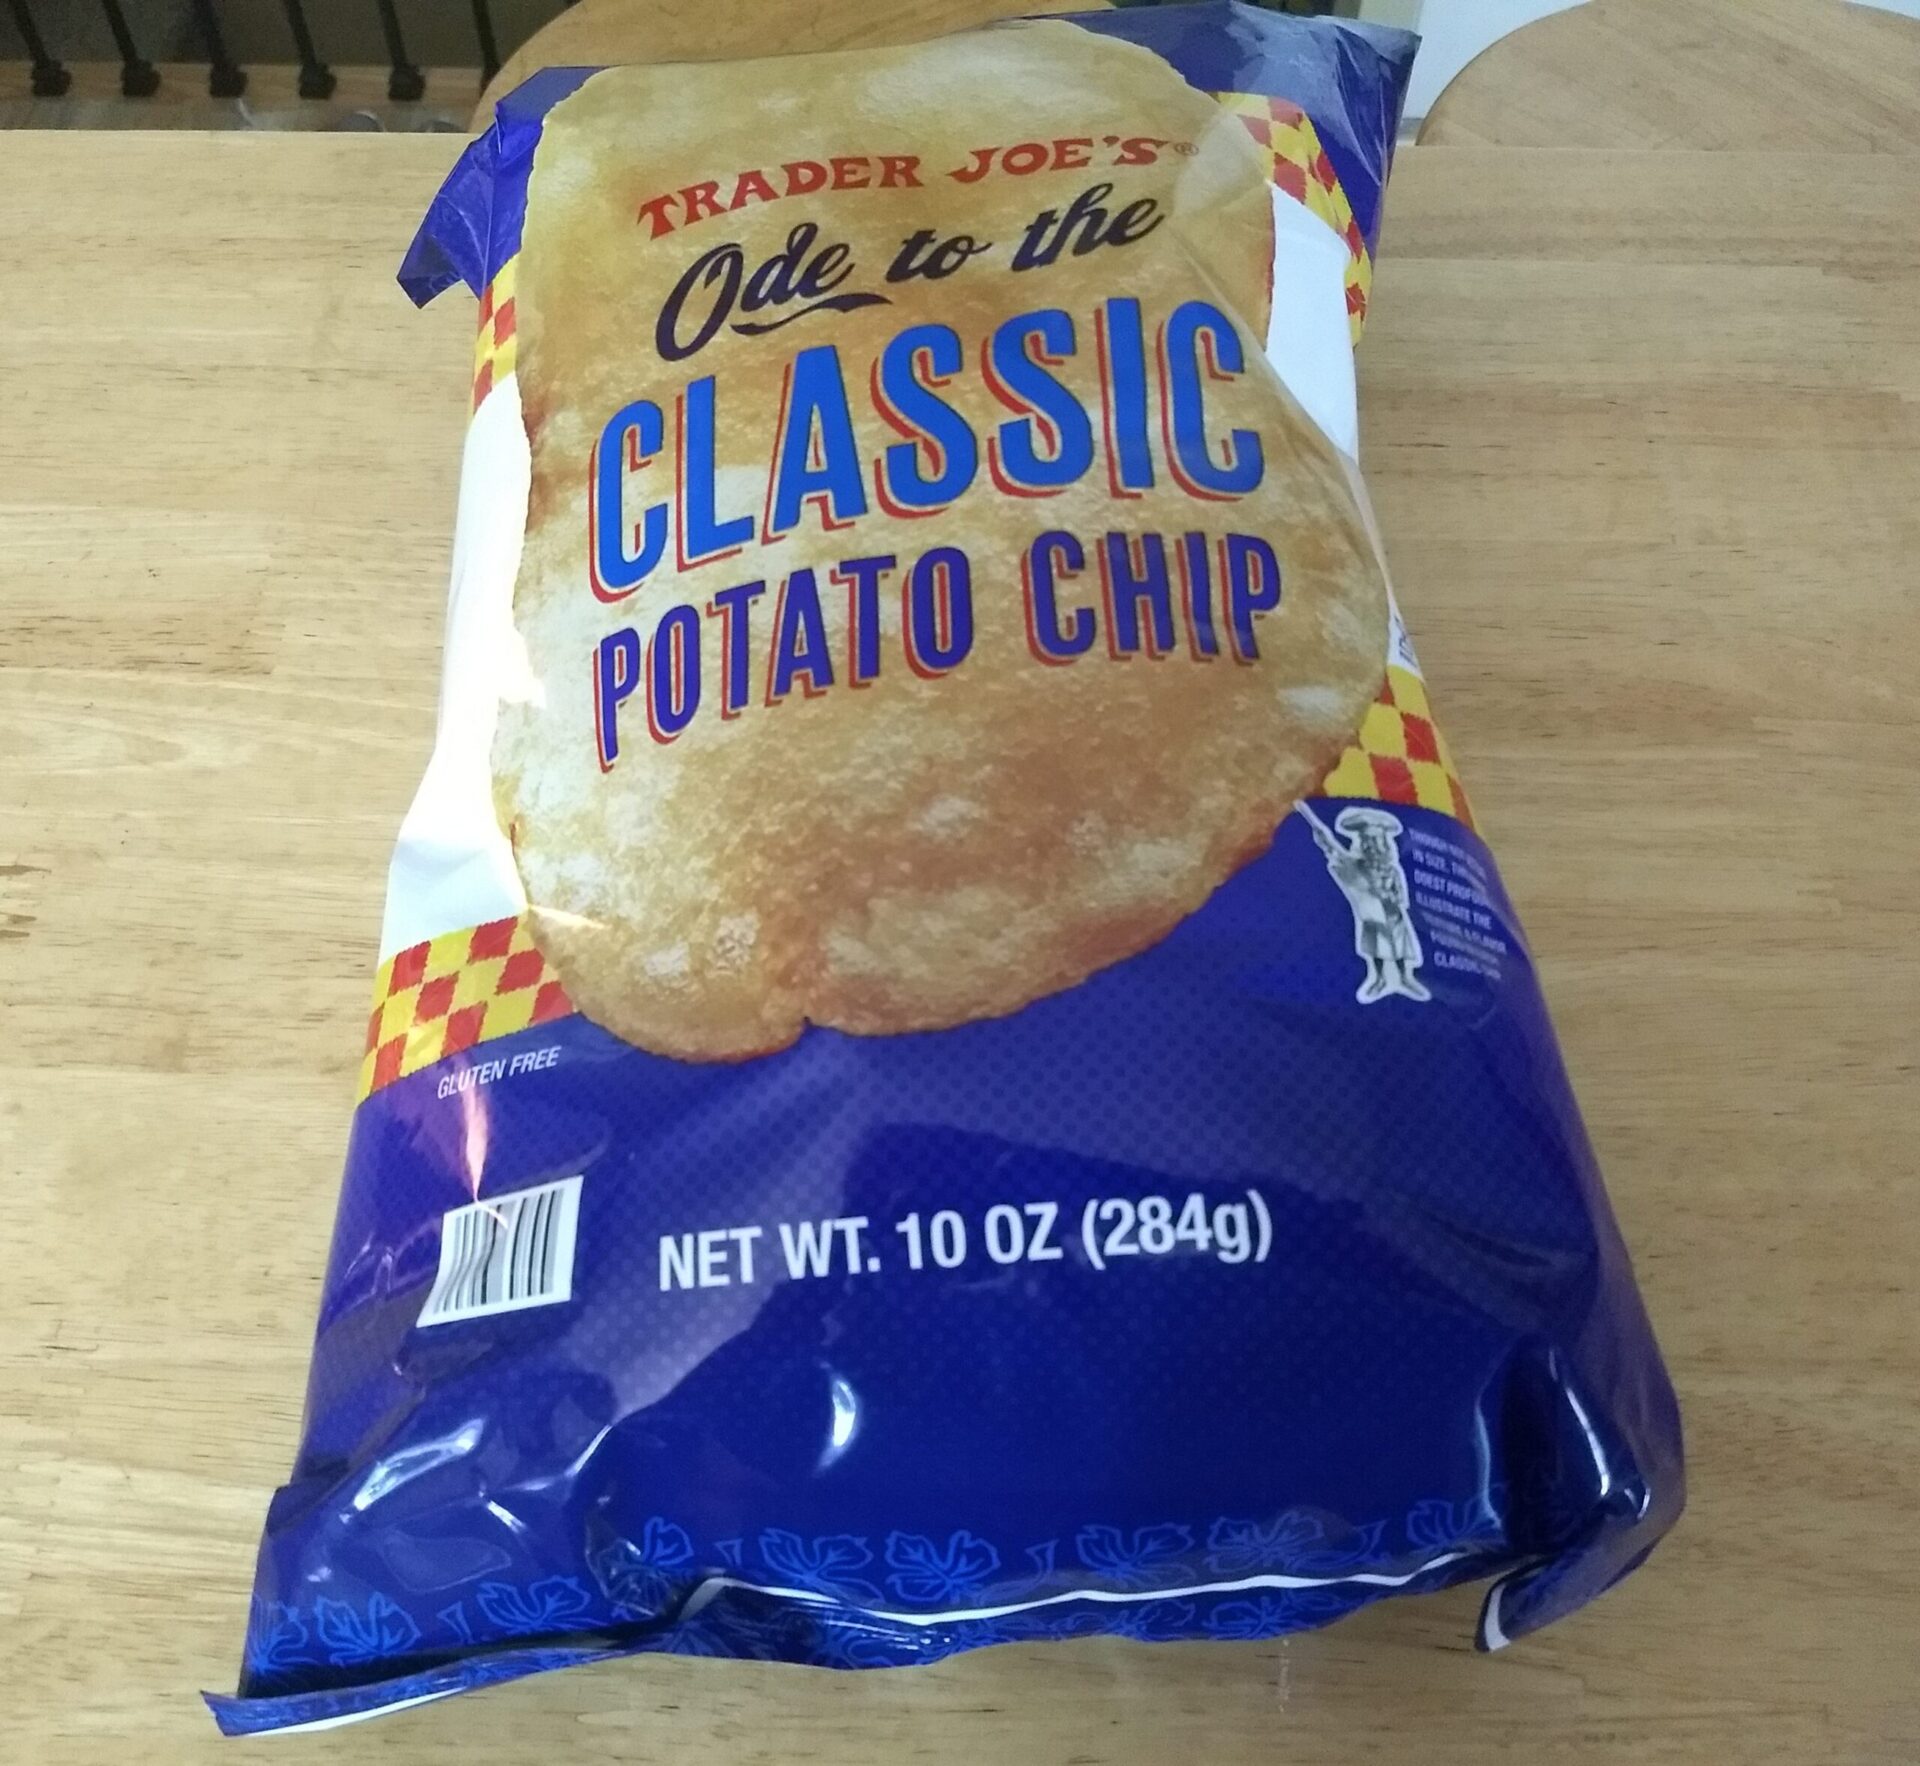 Trader Joe's Ode to the Classic Potato Chip